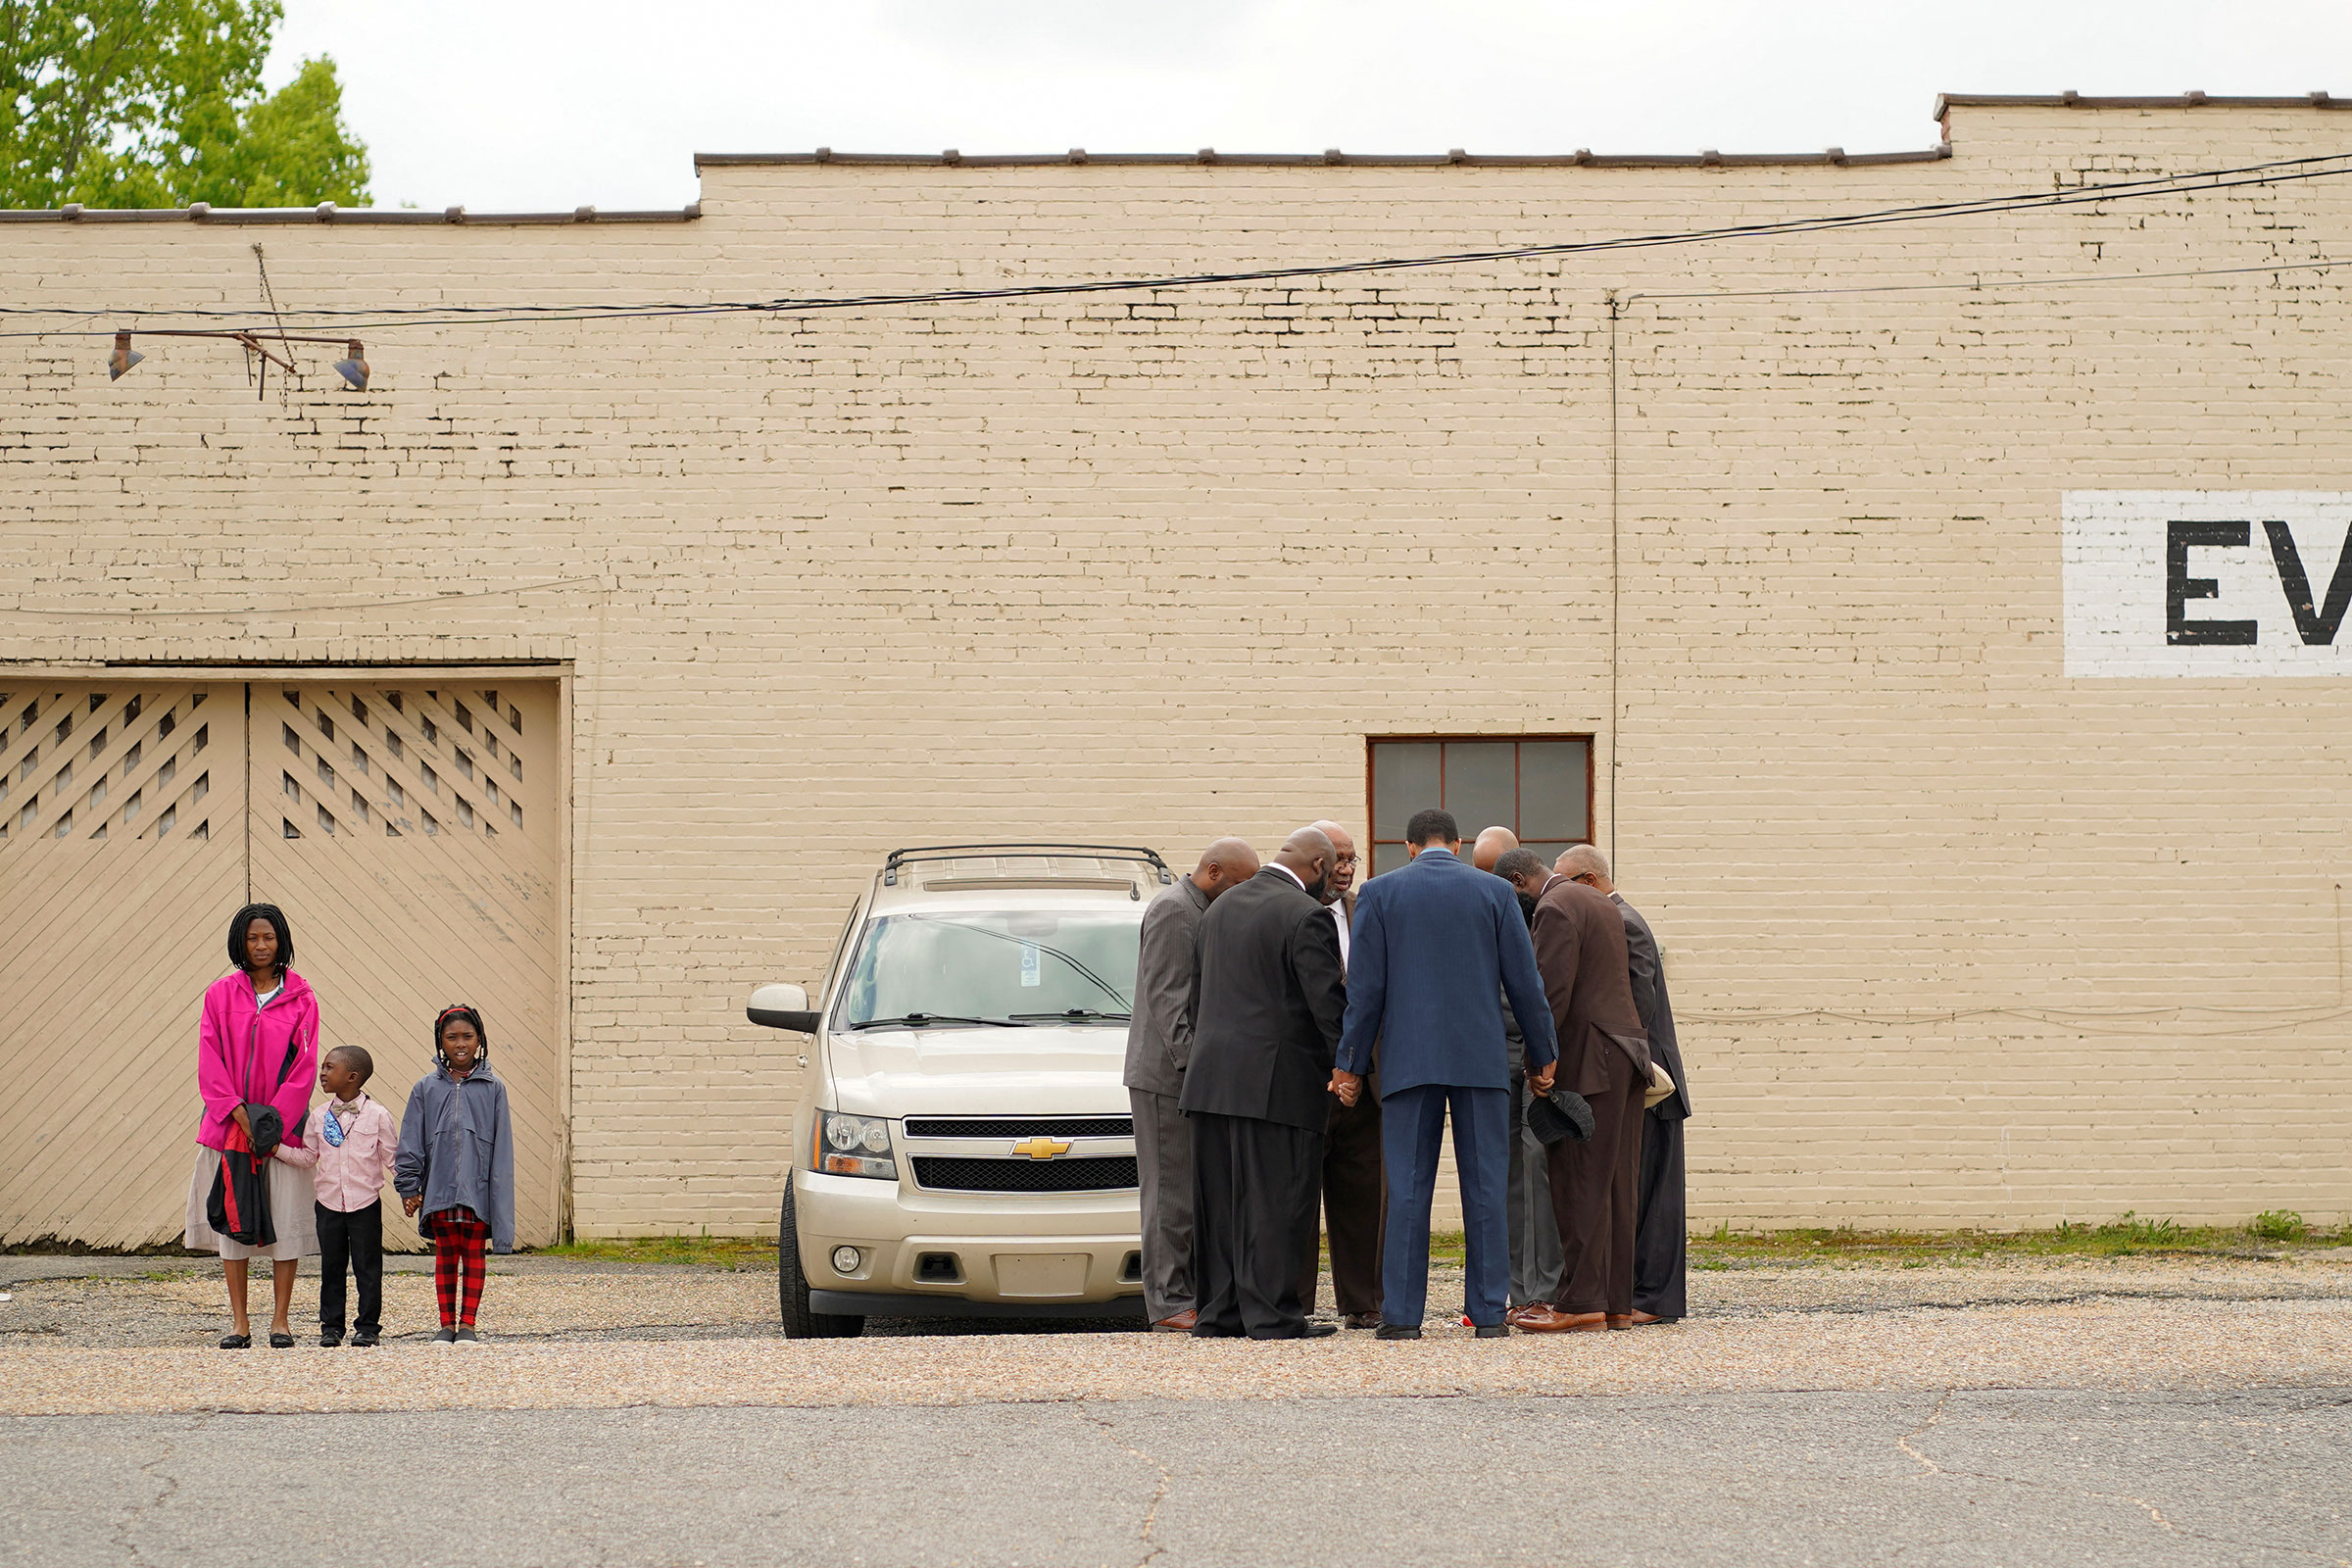 Pastors and community members pray ahead of a vigil the day after a shooting during a teenager's birthday party at Mahogany Masterpiece Dance Studio in Dadeville, Ala., on April 16.